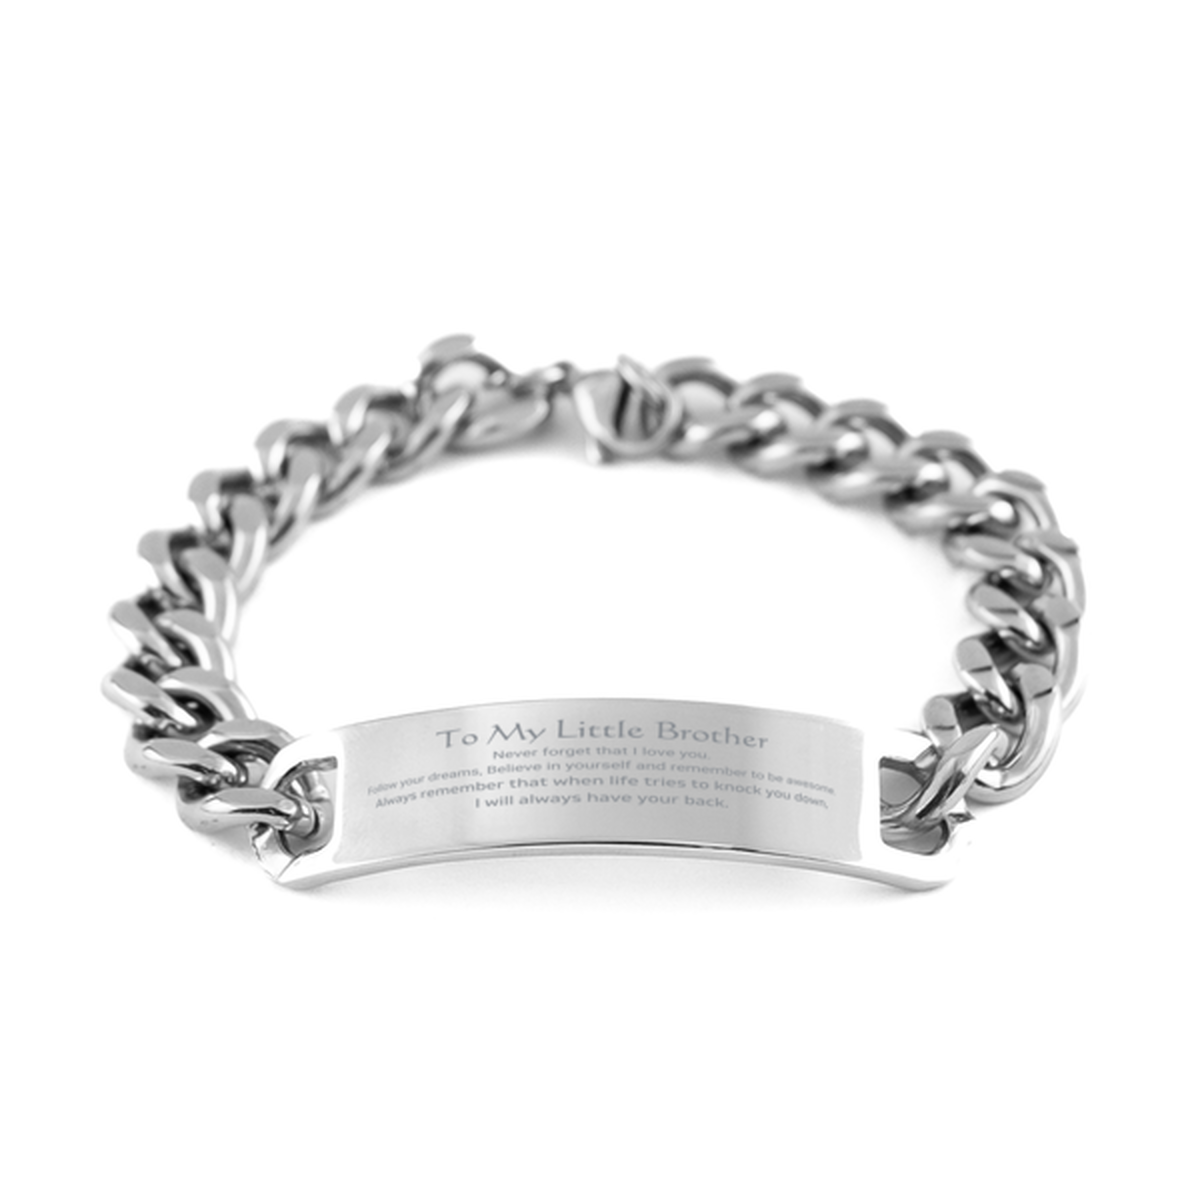 Inspirational Gifts for Little Brother, Follow your dreams, Believe in yourself, Little Brother Cuban Chain Stainless Steel Bracelet, Birthday Christmas Unique Gifts For Little Brother